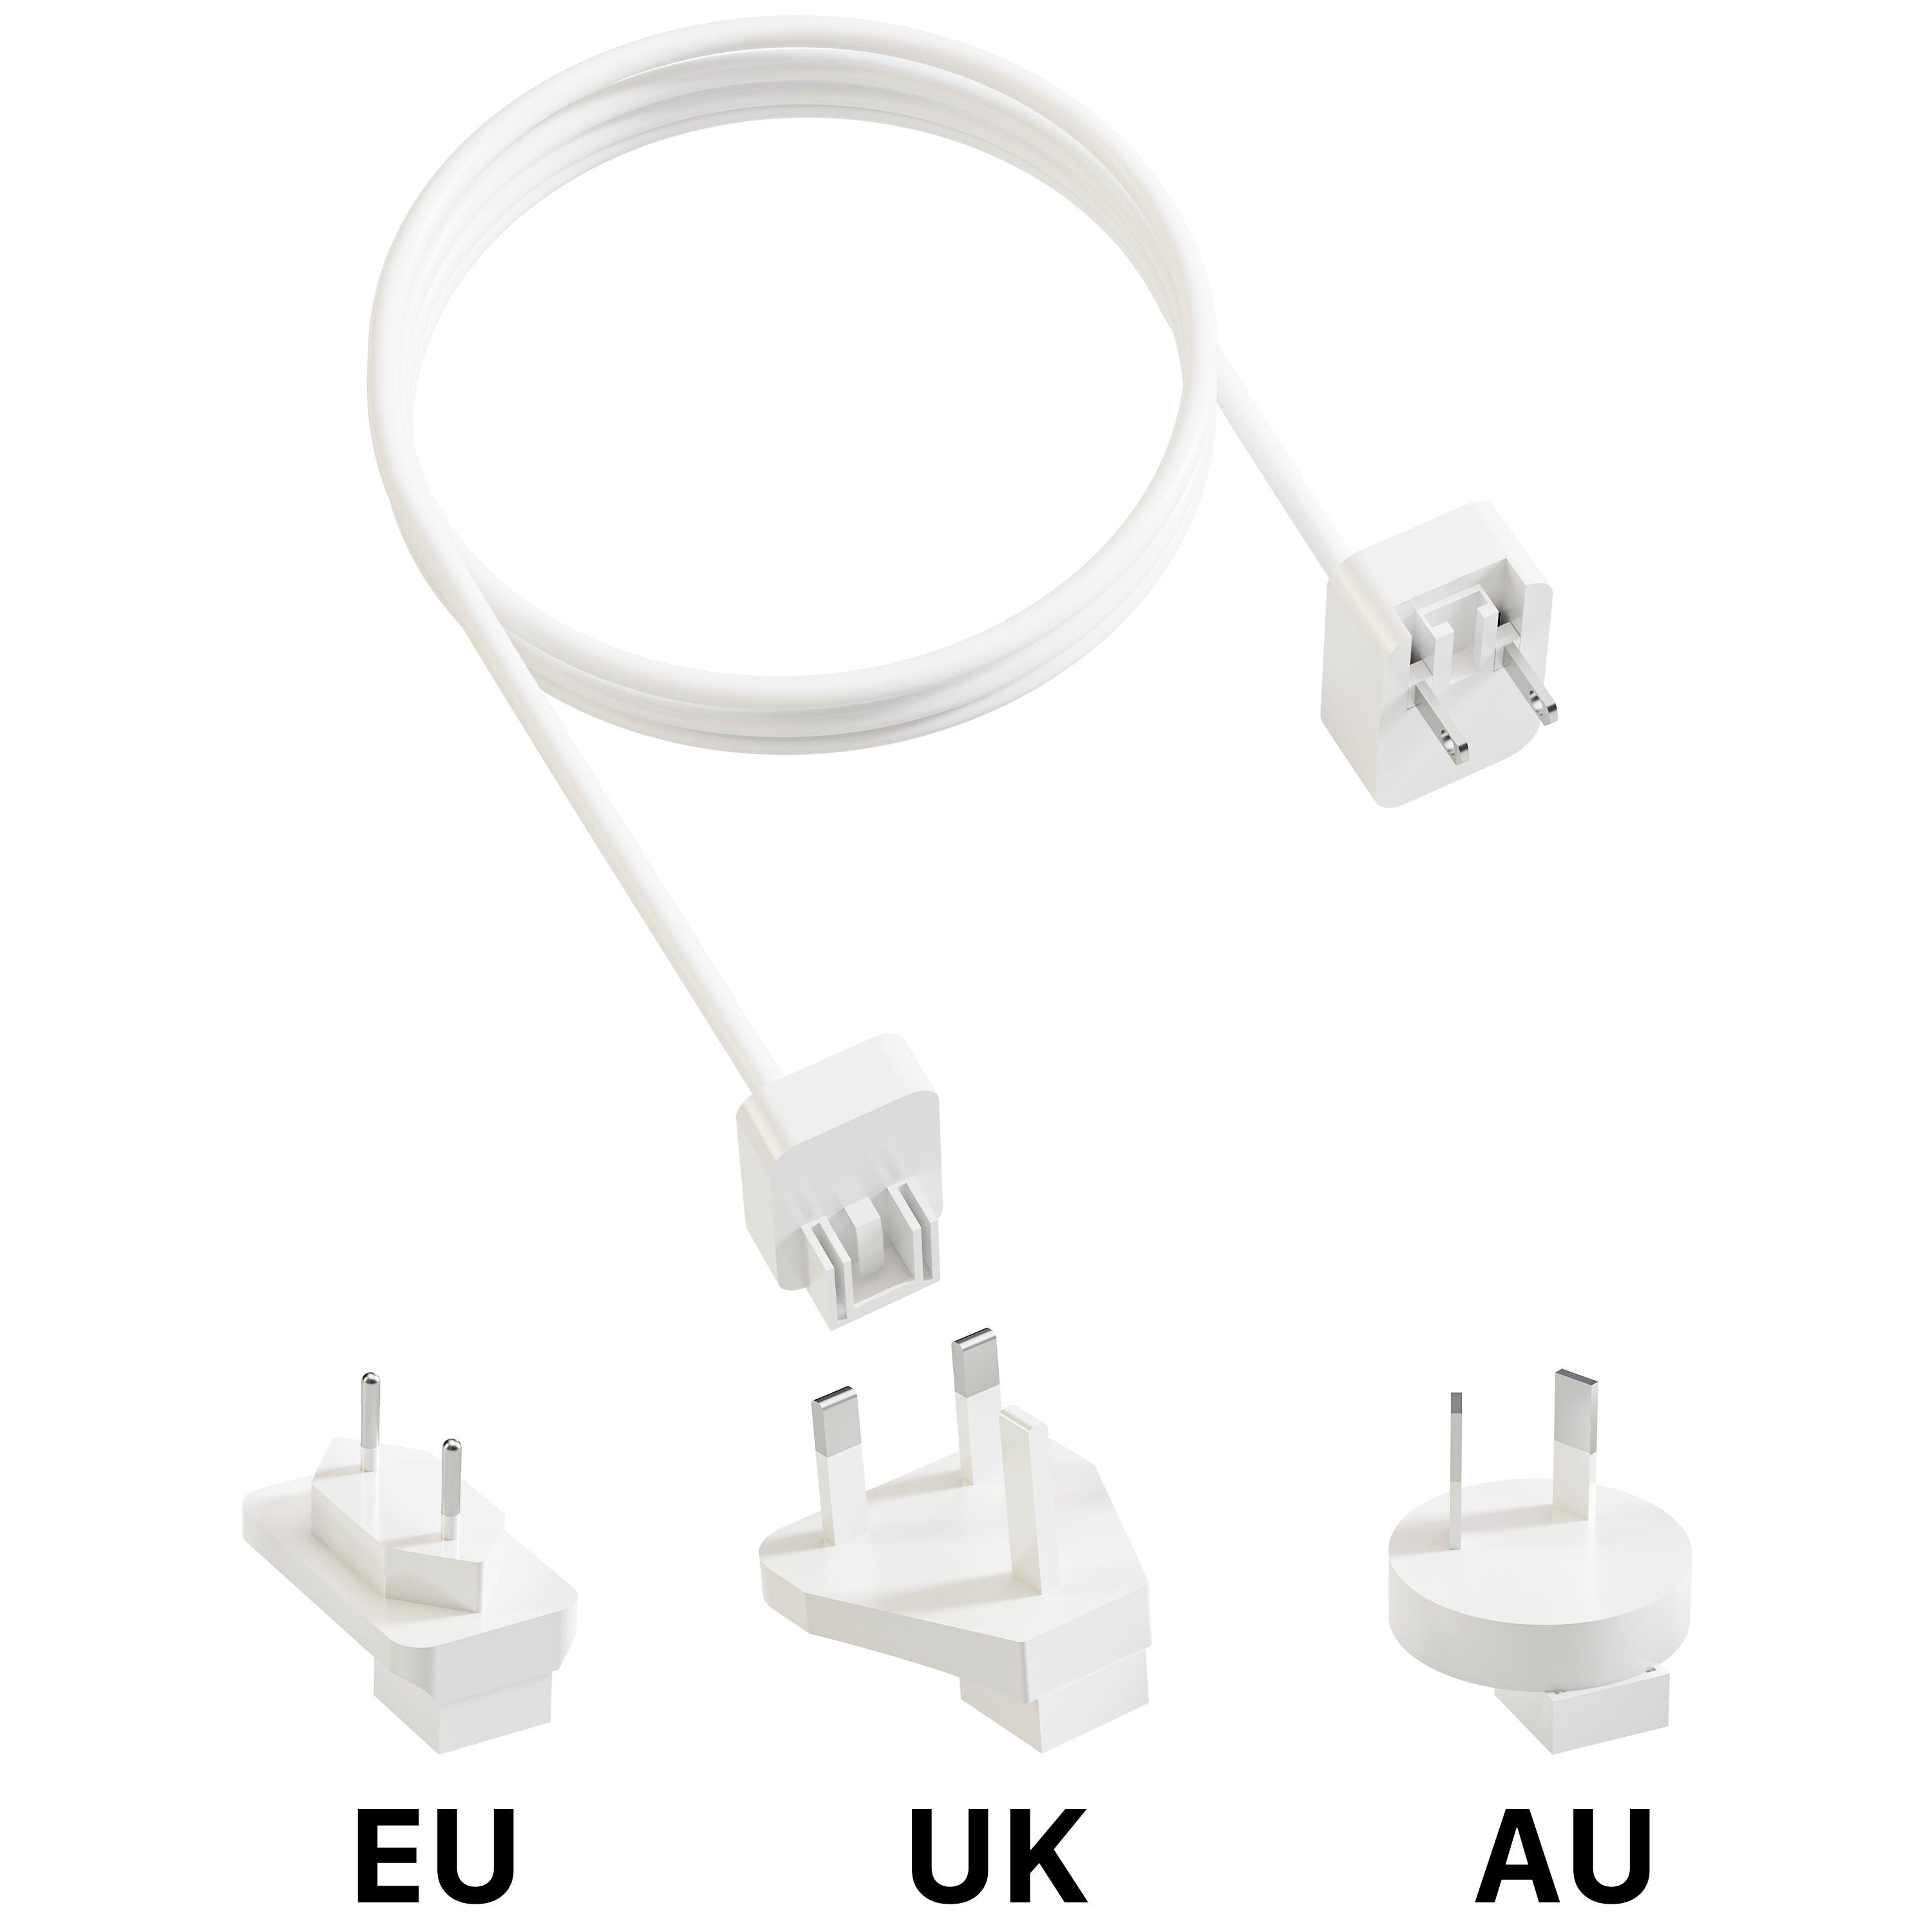 INVZI Extension Power Cord with US Plug Compatible with EU/UK/AU Travel Adapters 6.6ft(2m) - INVZI